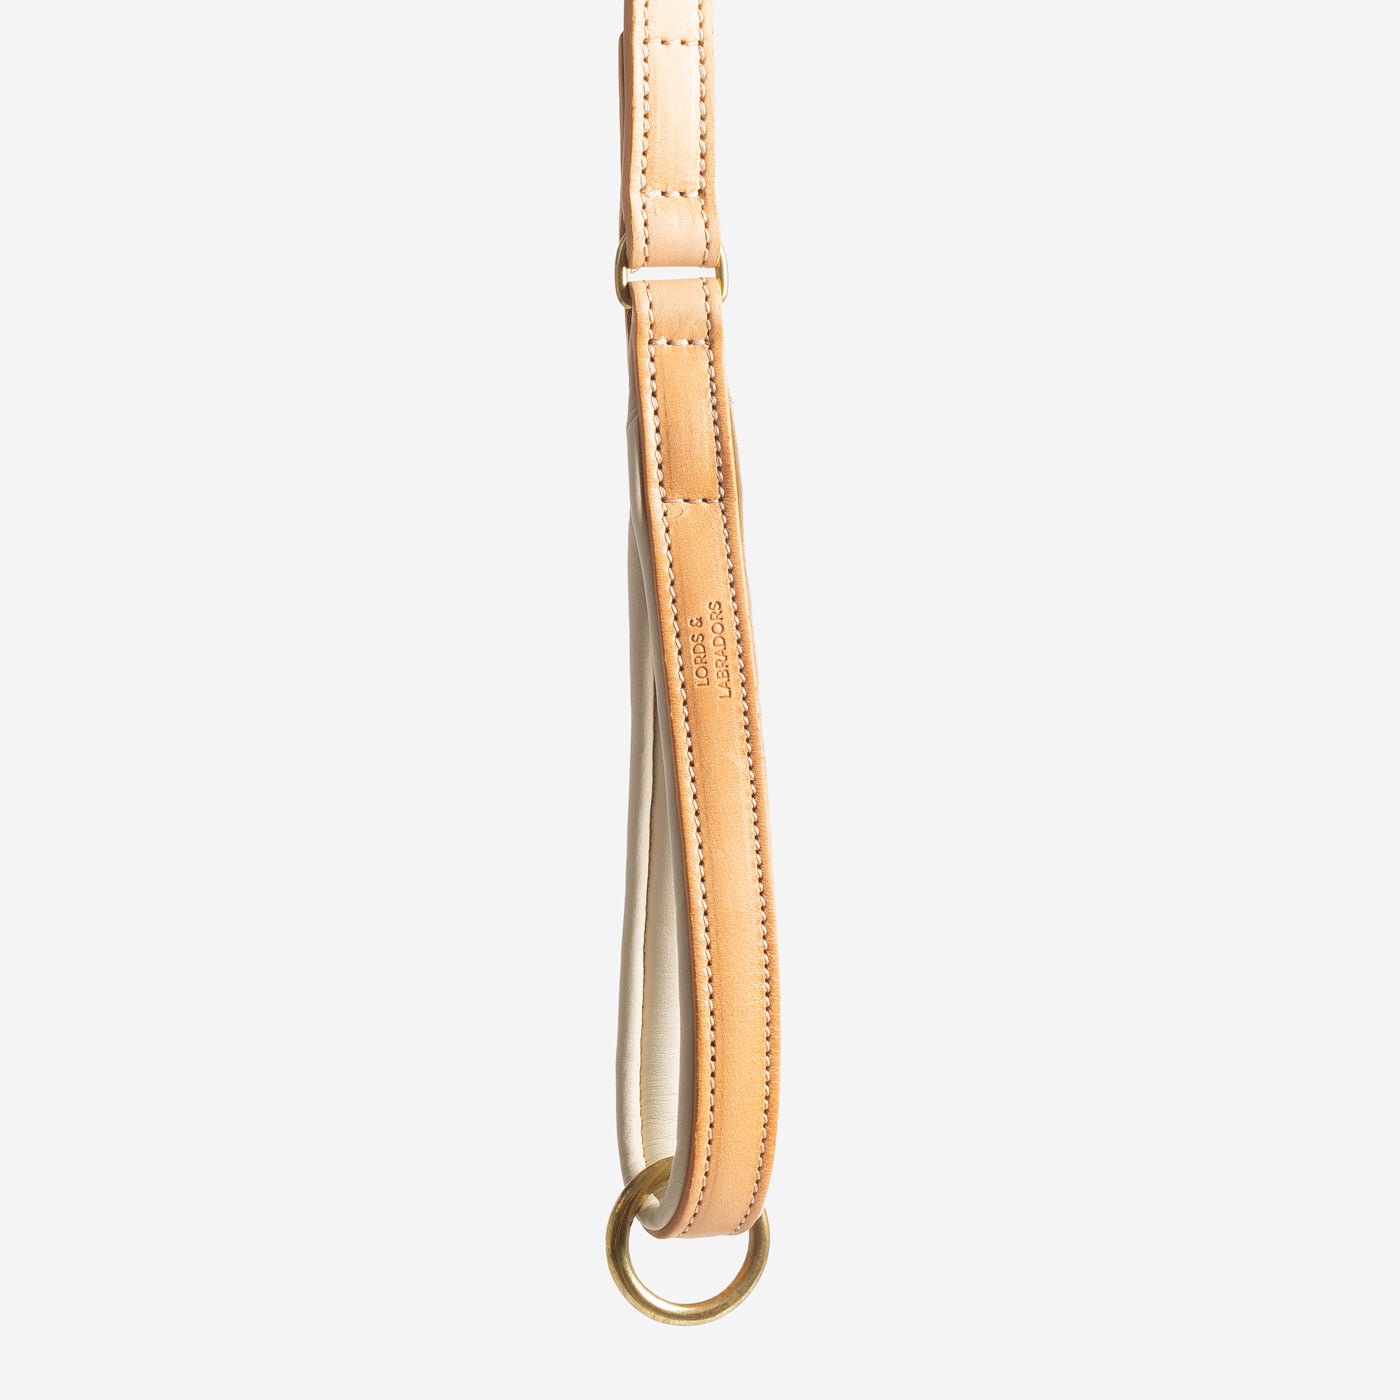 Discover dog walking luxury with our handcrafted Italian padded leather dog Leash in Tan & Cream! The perfect Leash for dogs available now at Lords & Labradors US